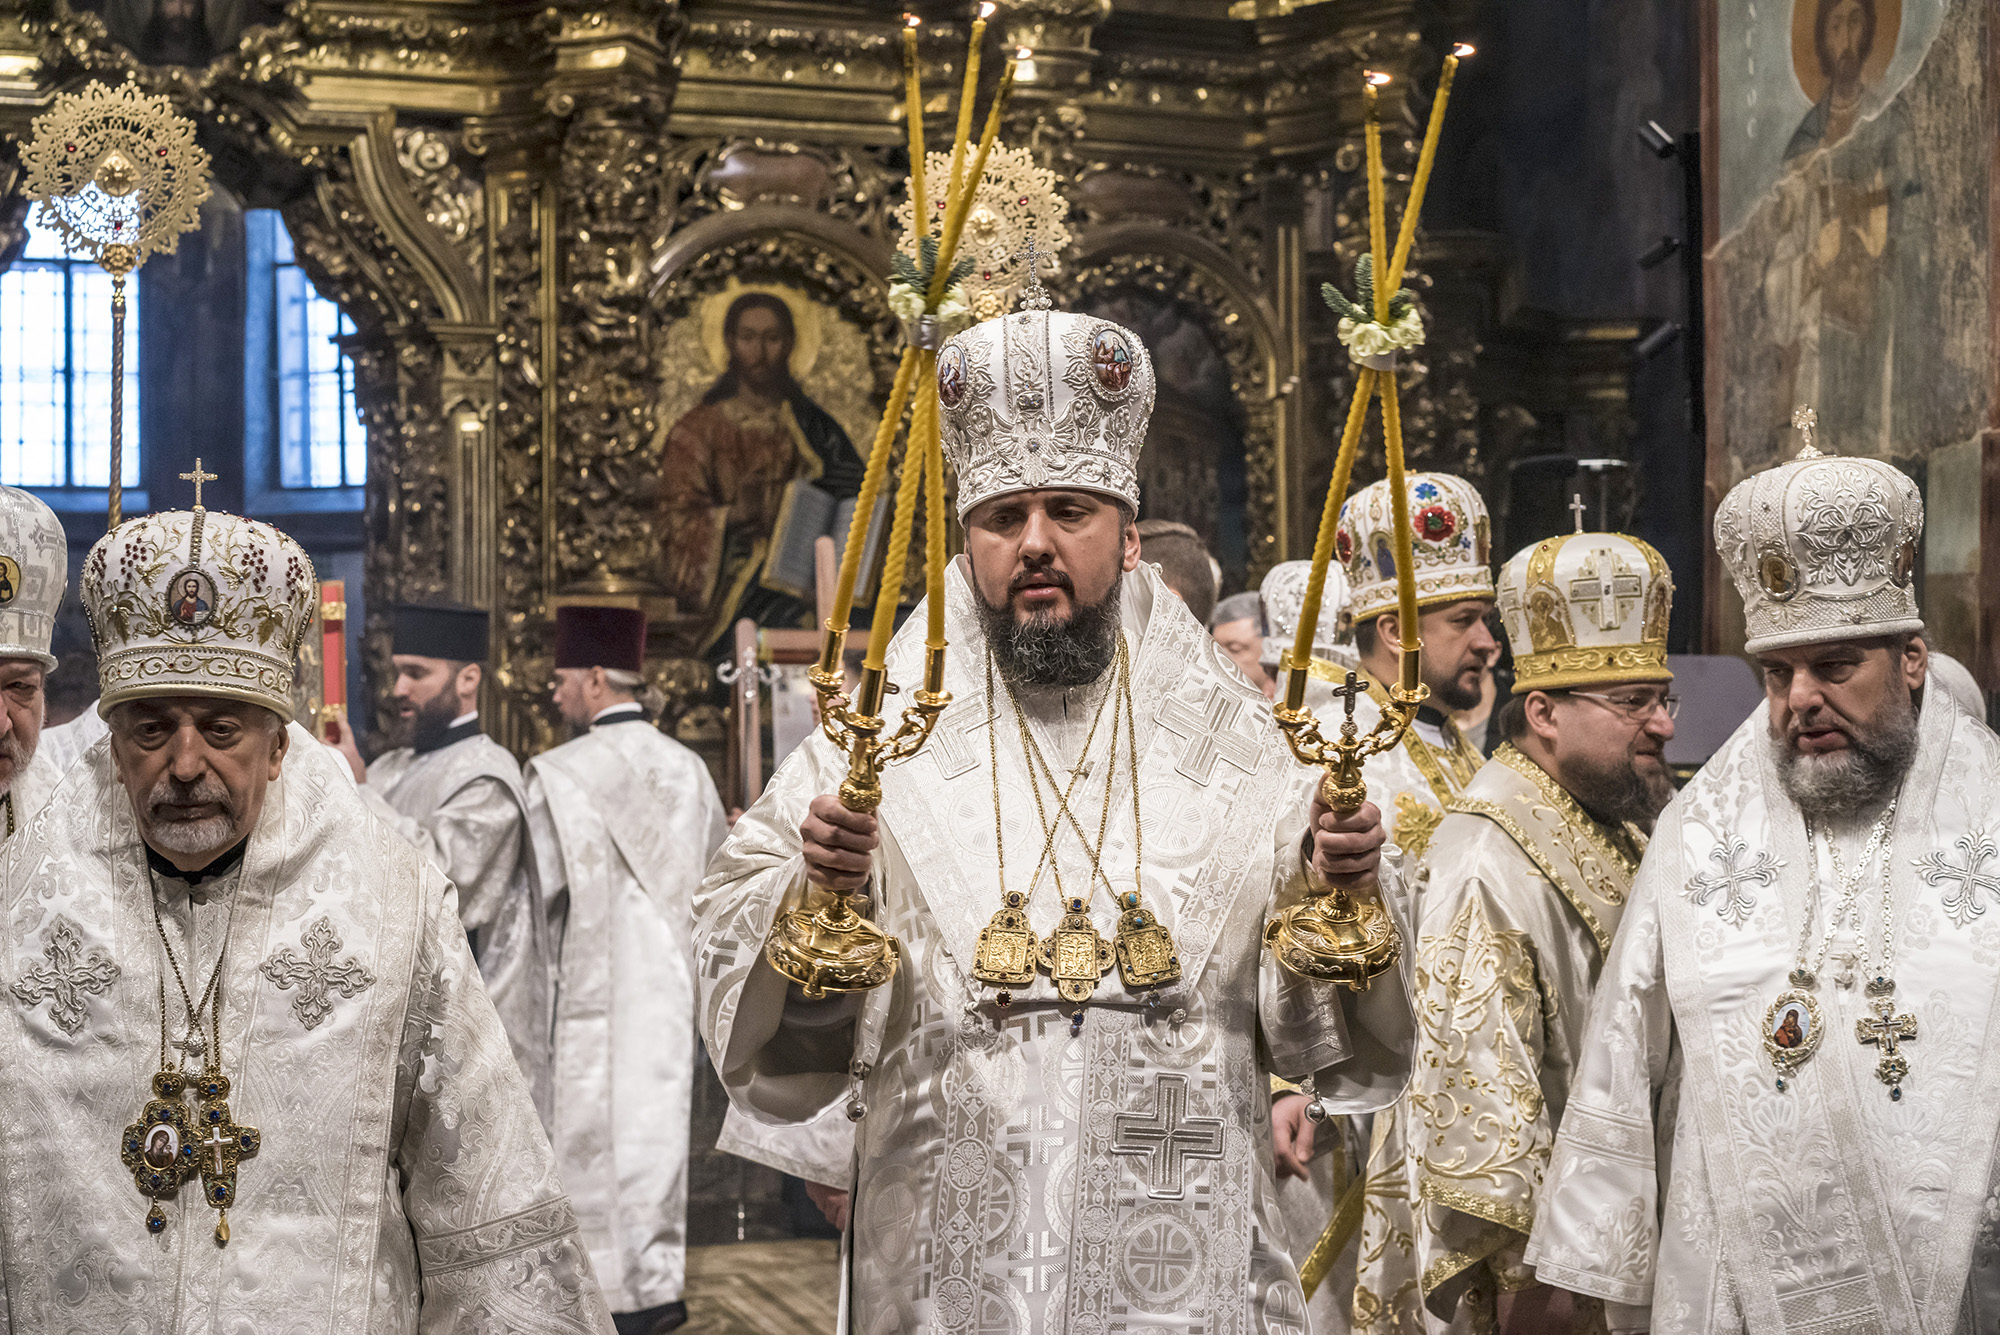 His Beatitude Epiphanius, Metropolitan of Kyiv and all Ukraine, center, participates in Christmas Liturgy at St. Sophia's Cathedral on January 7, 2019 in Kyiv, Ukraine.